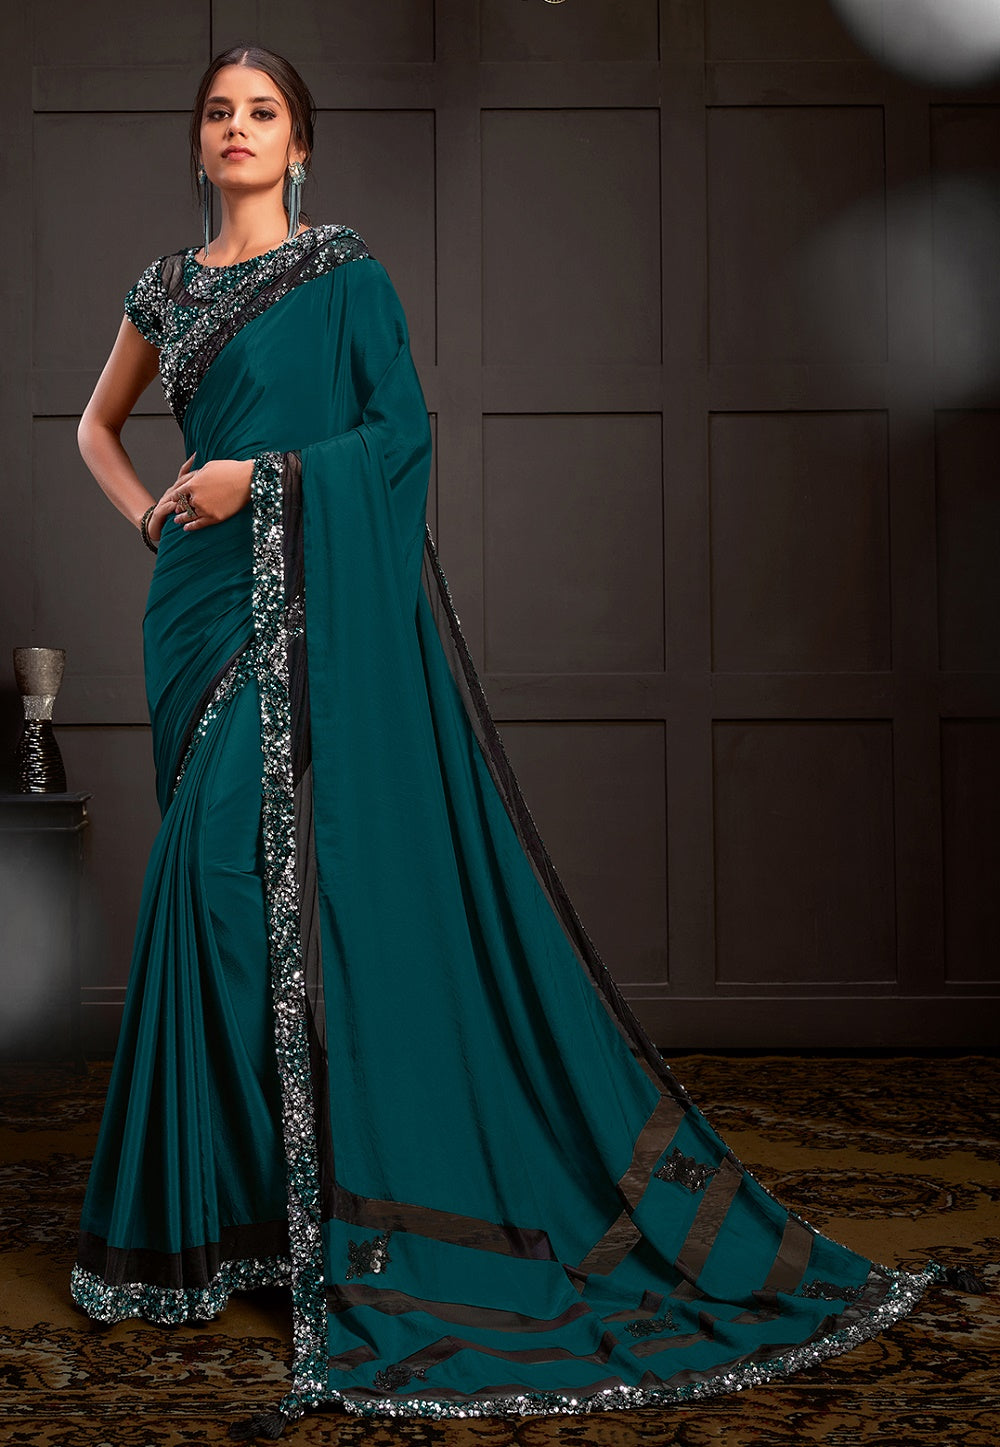 Sequined Georgette Saree in Teal Blue